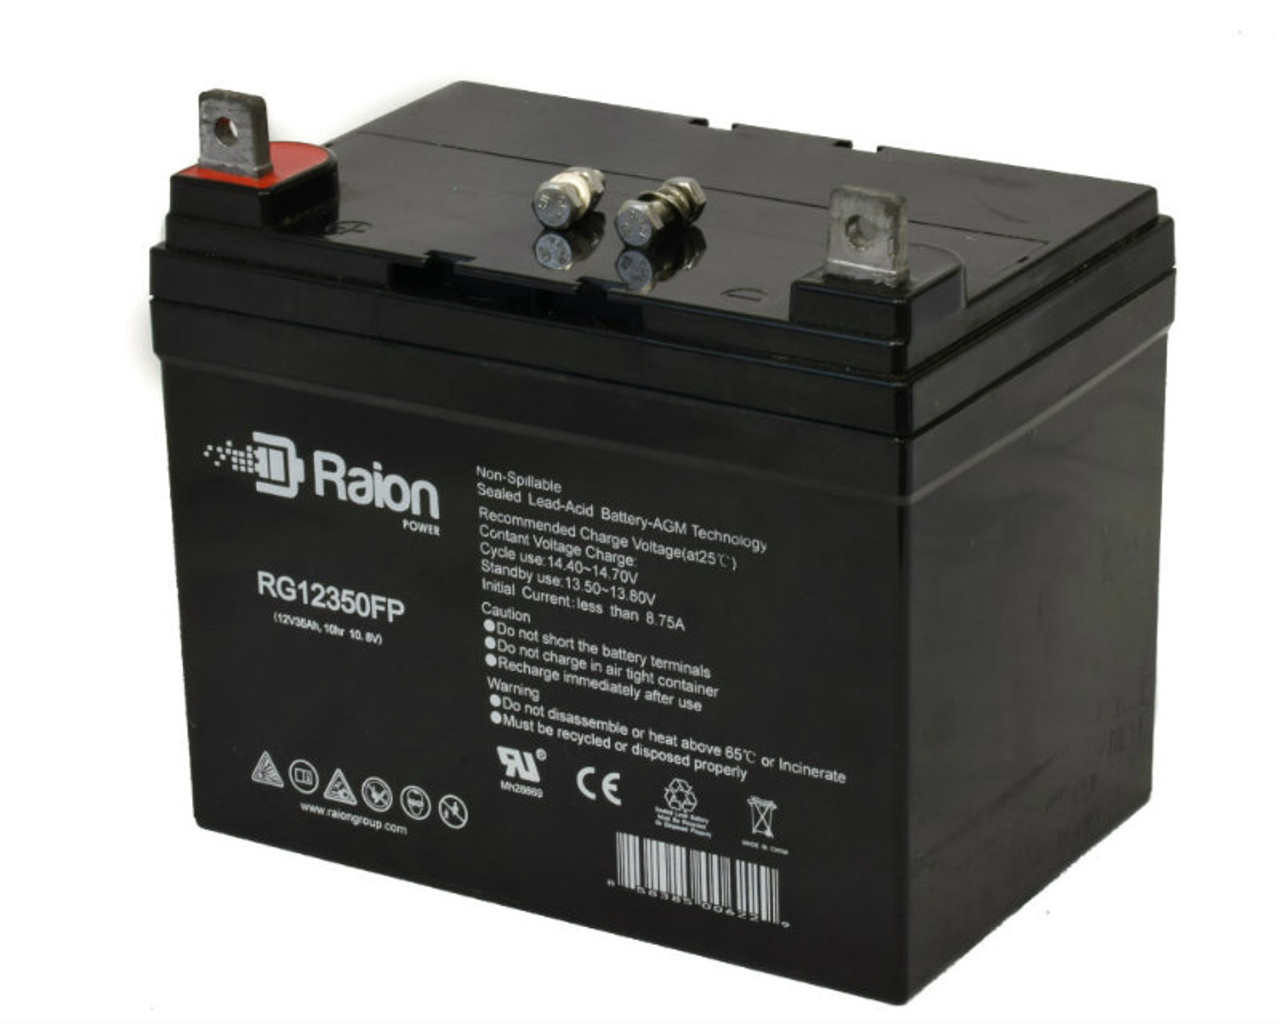 Raion Power Replacement 12V 35Ah RG12350FP Battery for B&B Battery EP40-12-IT